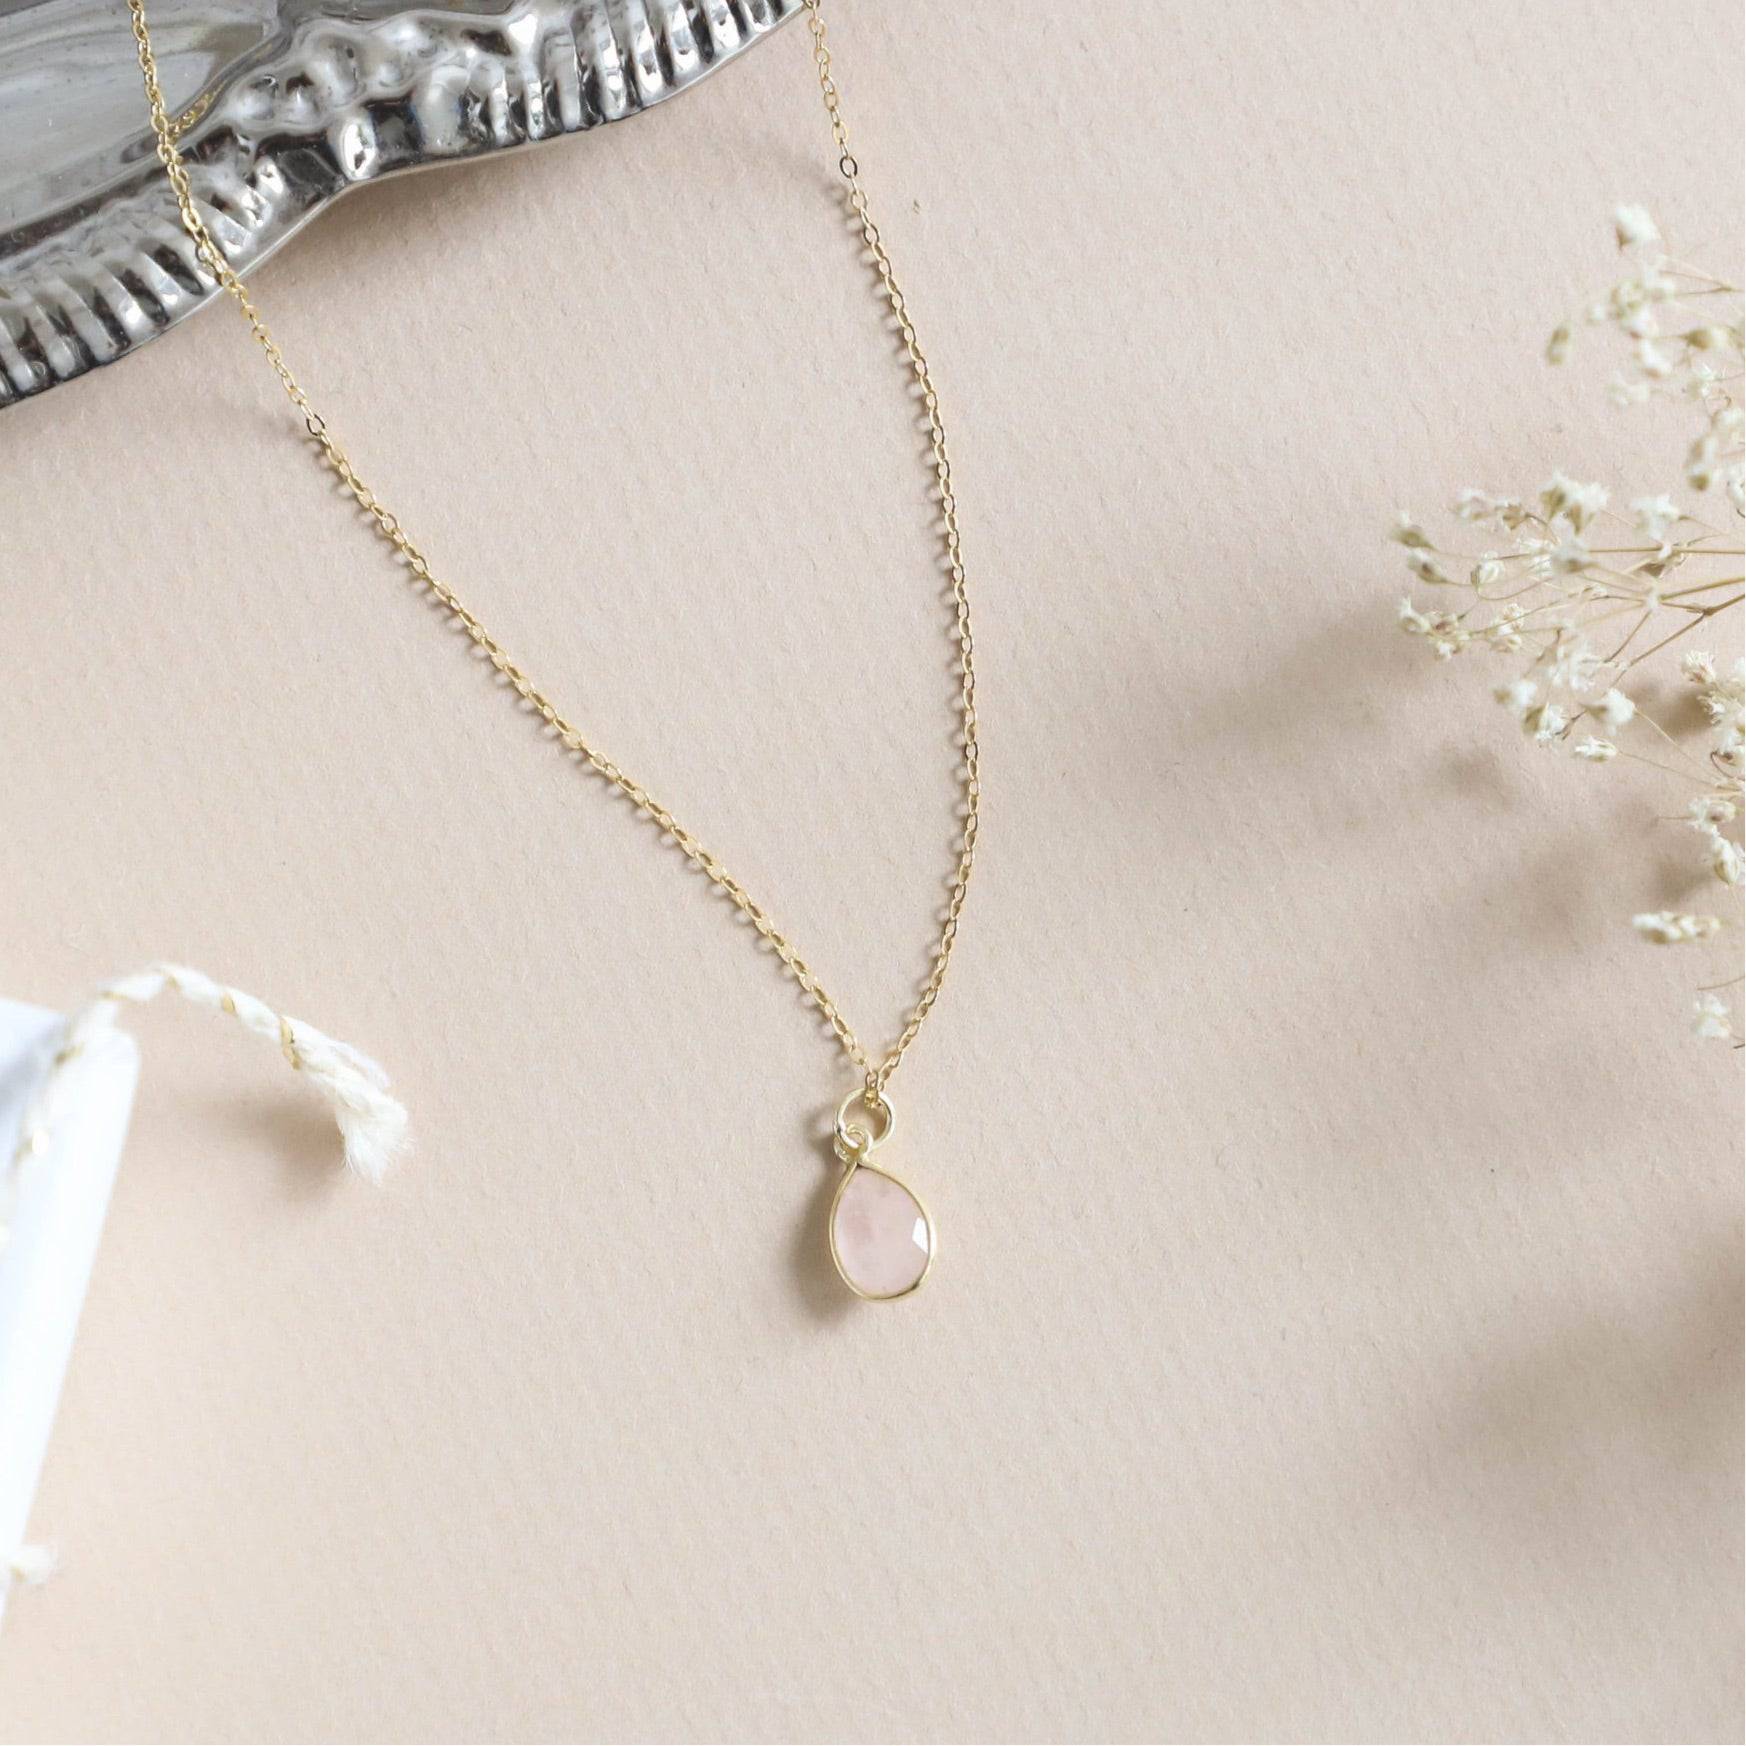 ROSE QRTZ NECKLACE GOLD - Out of the Blue